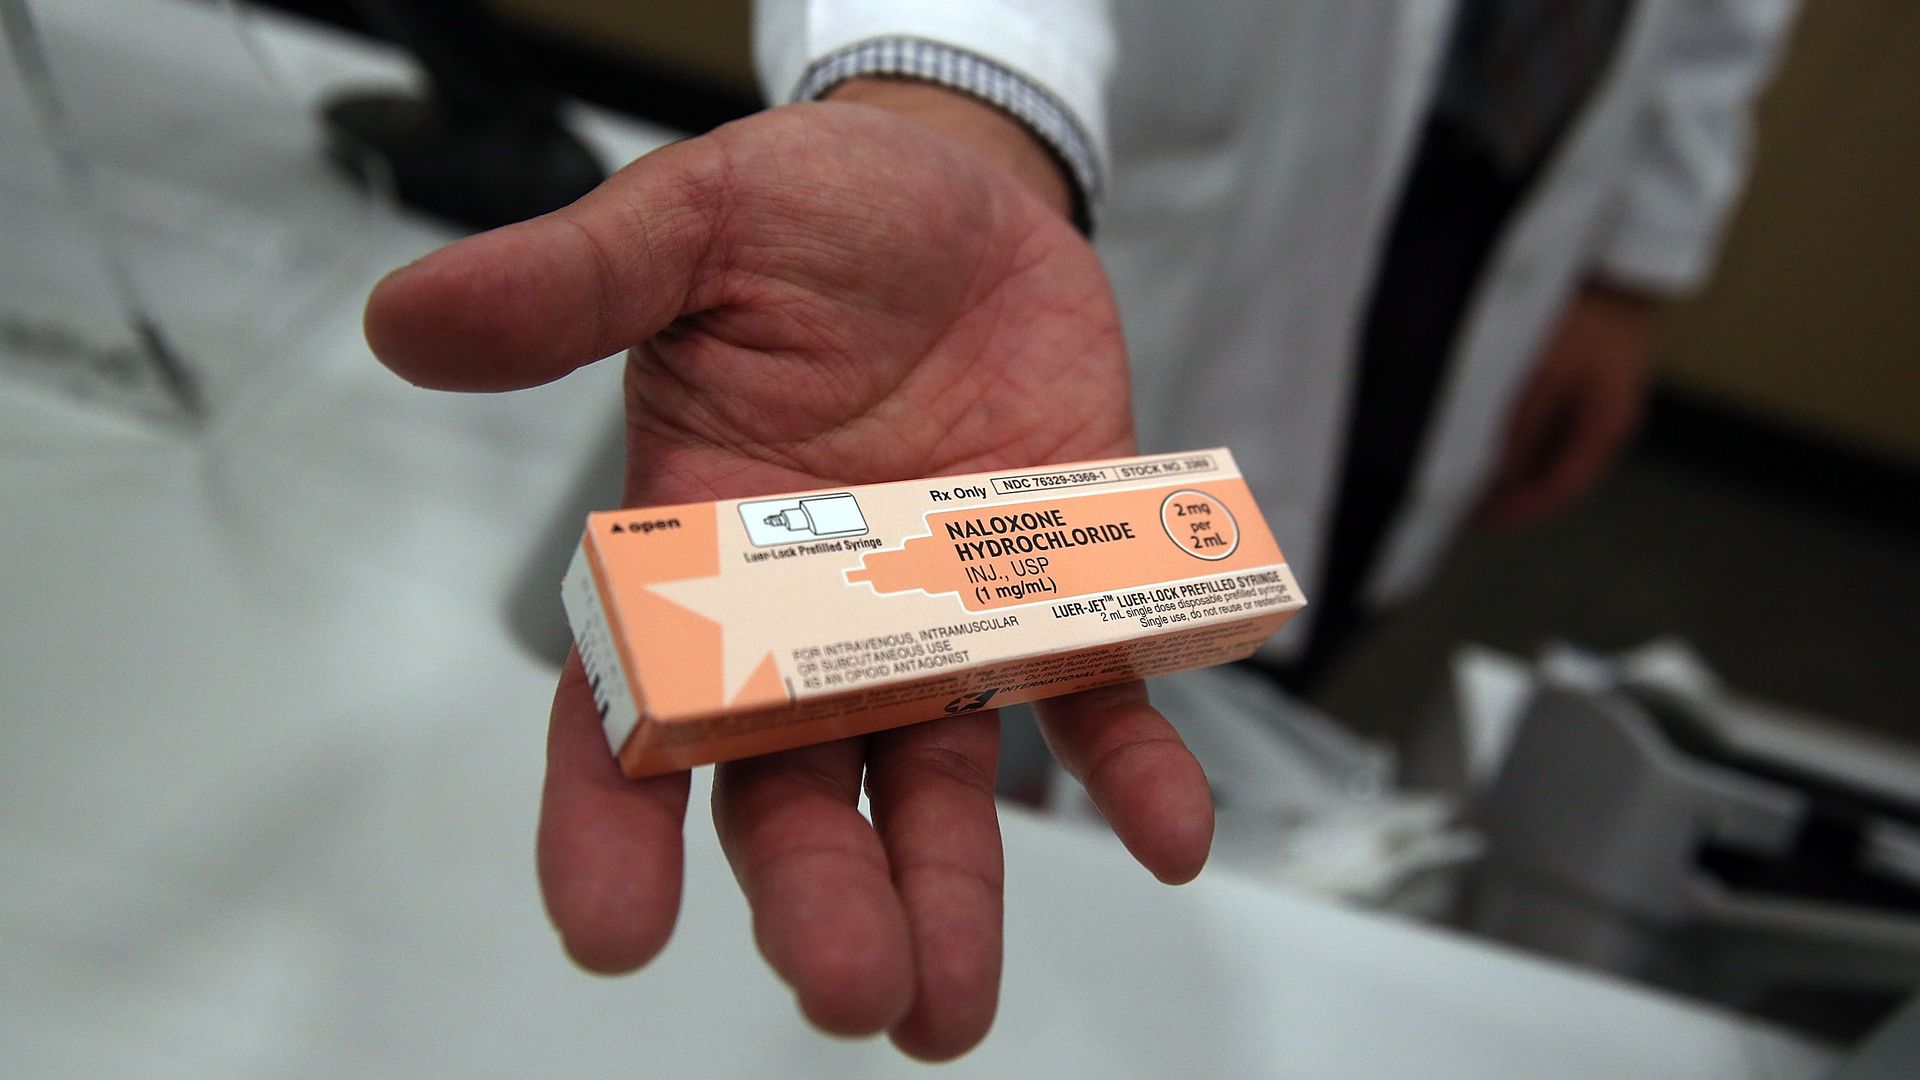 In this image, a doctor holds an orange prescription box of Oxycontin pills up to the camera. 